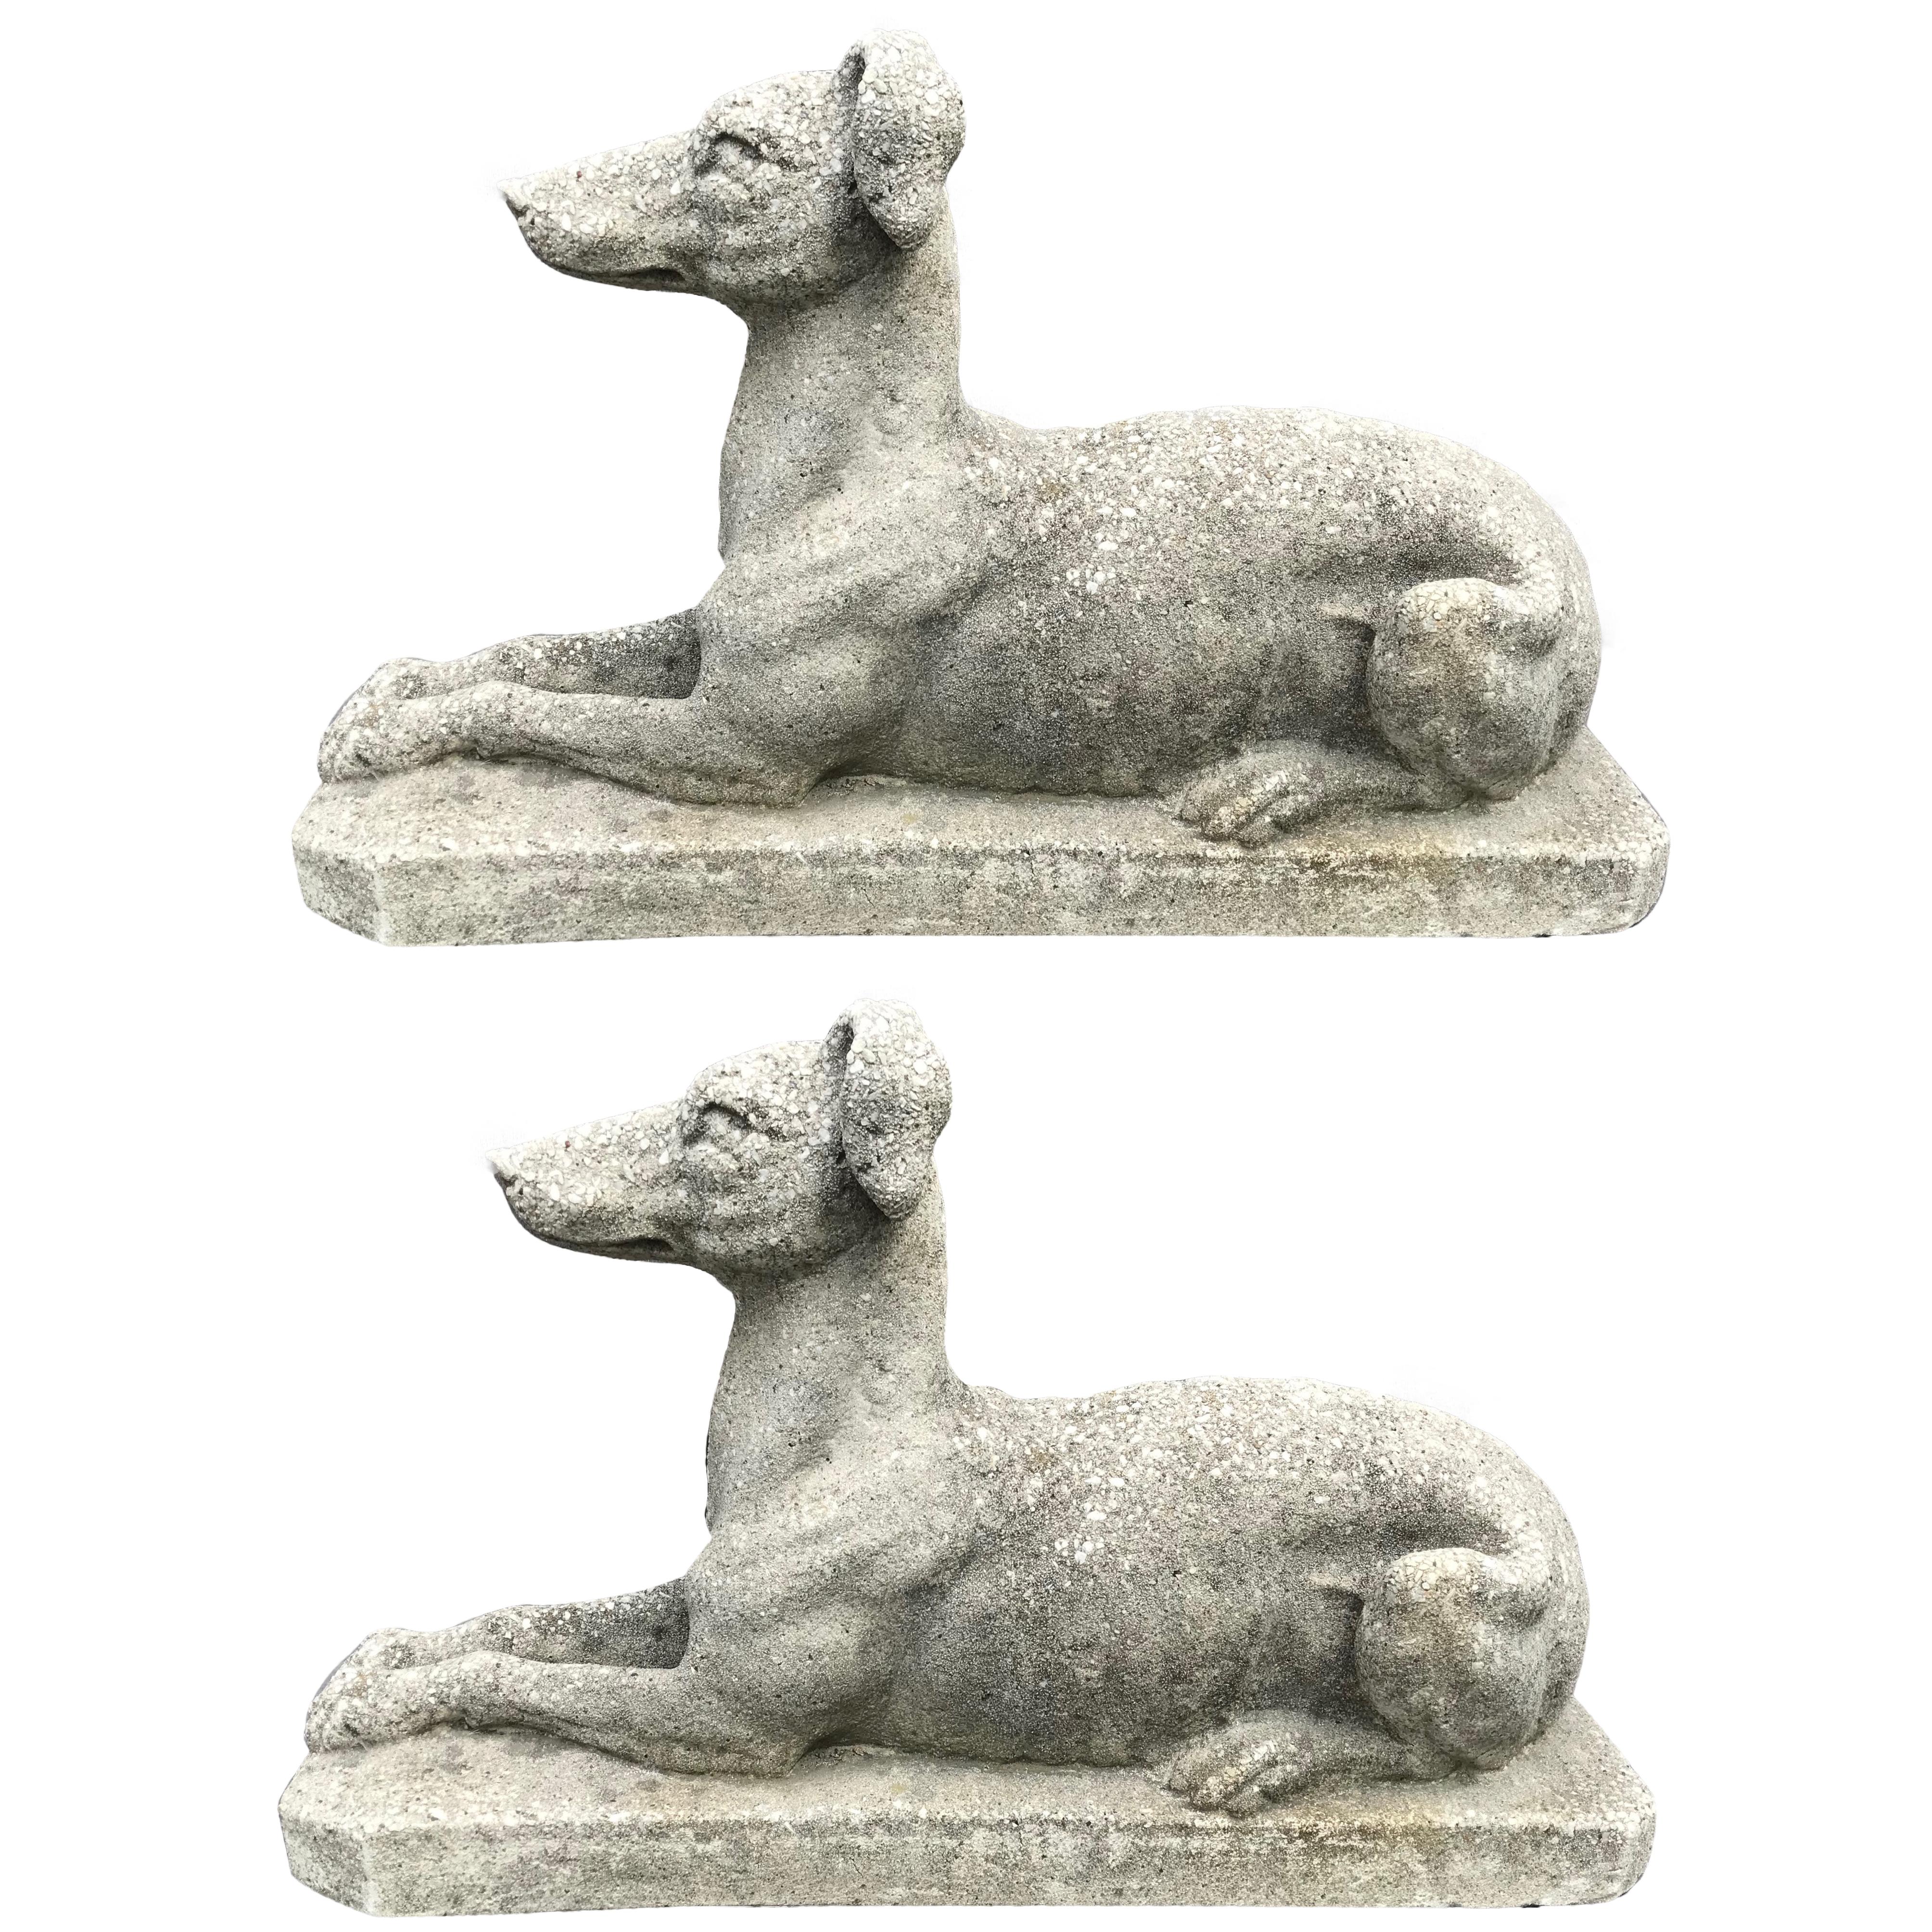 Pair stone greyhound dogs. Pair of vintage whippet/greyhound cast stone garden ornaments with imbedded pebbles; dogs are depicted in guard position, perfect on either side of an entry or in a garden setting, England, circa 1930.
Dimensions: 7.5